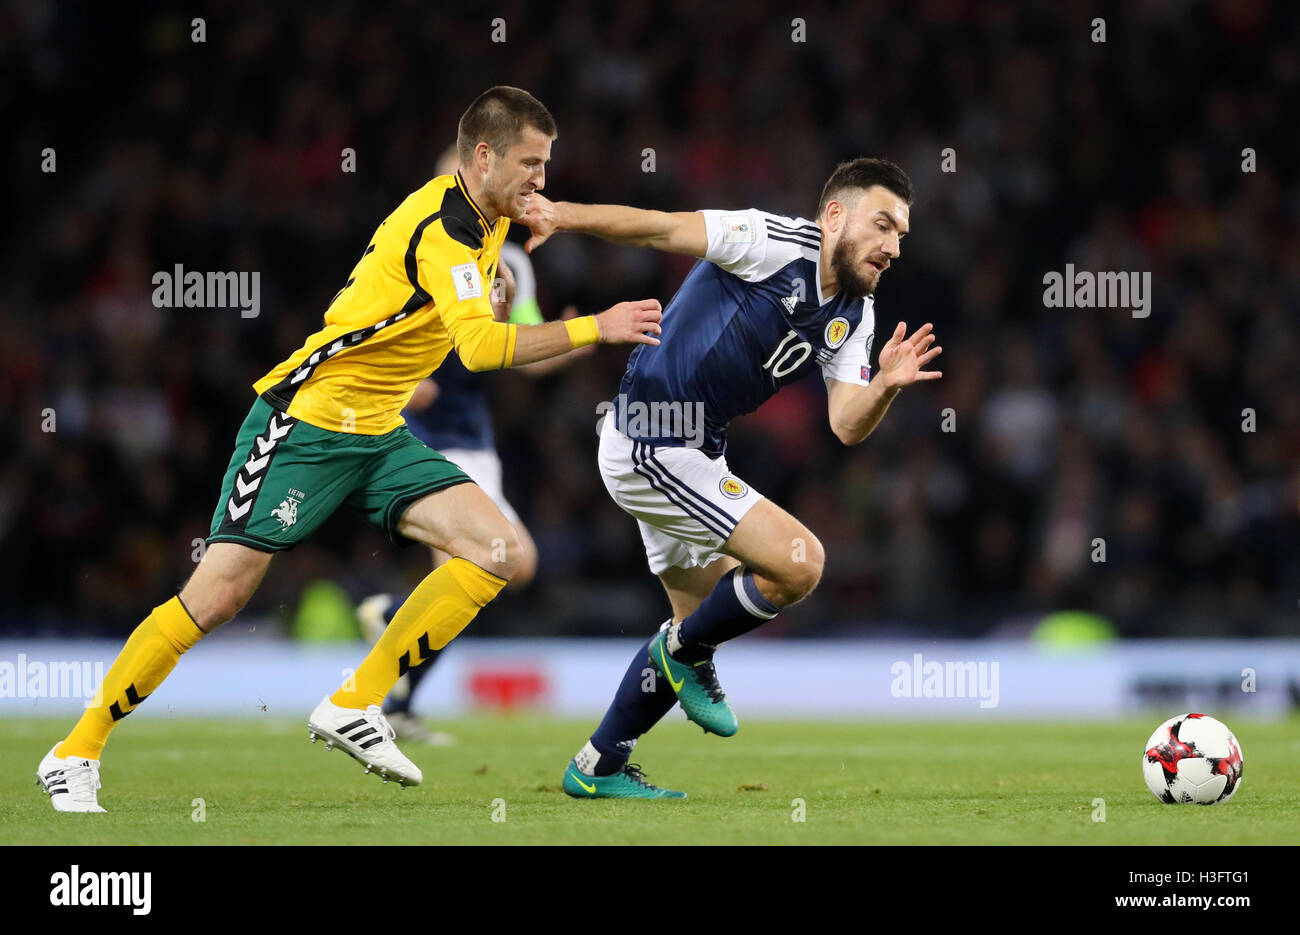 Lithuania's Mantas Kuklys and Scotland's Robert Snodgrass during the 2018 FIFA World Cup Qualifying match at Hampden Park, Glasgow. Stock Photo